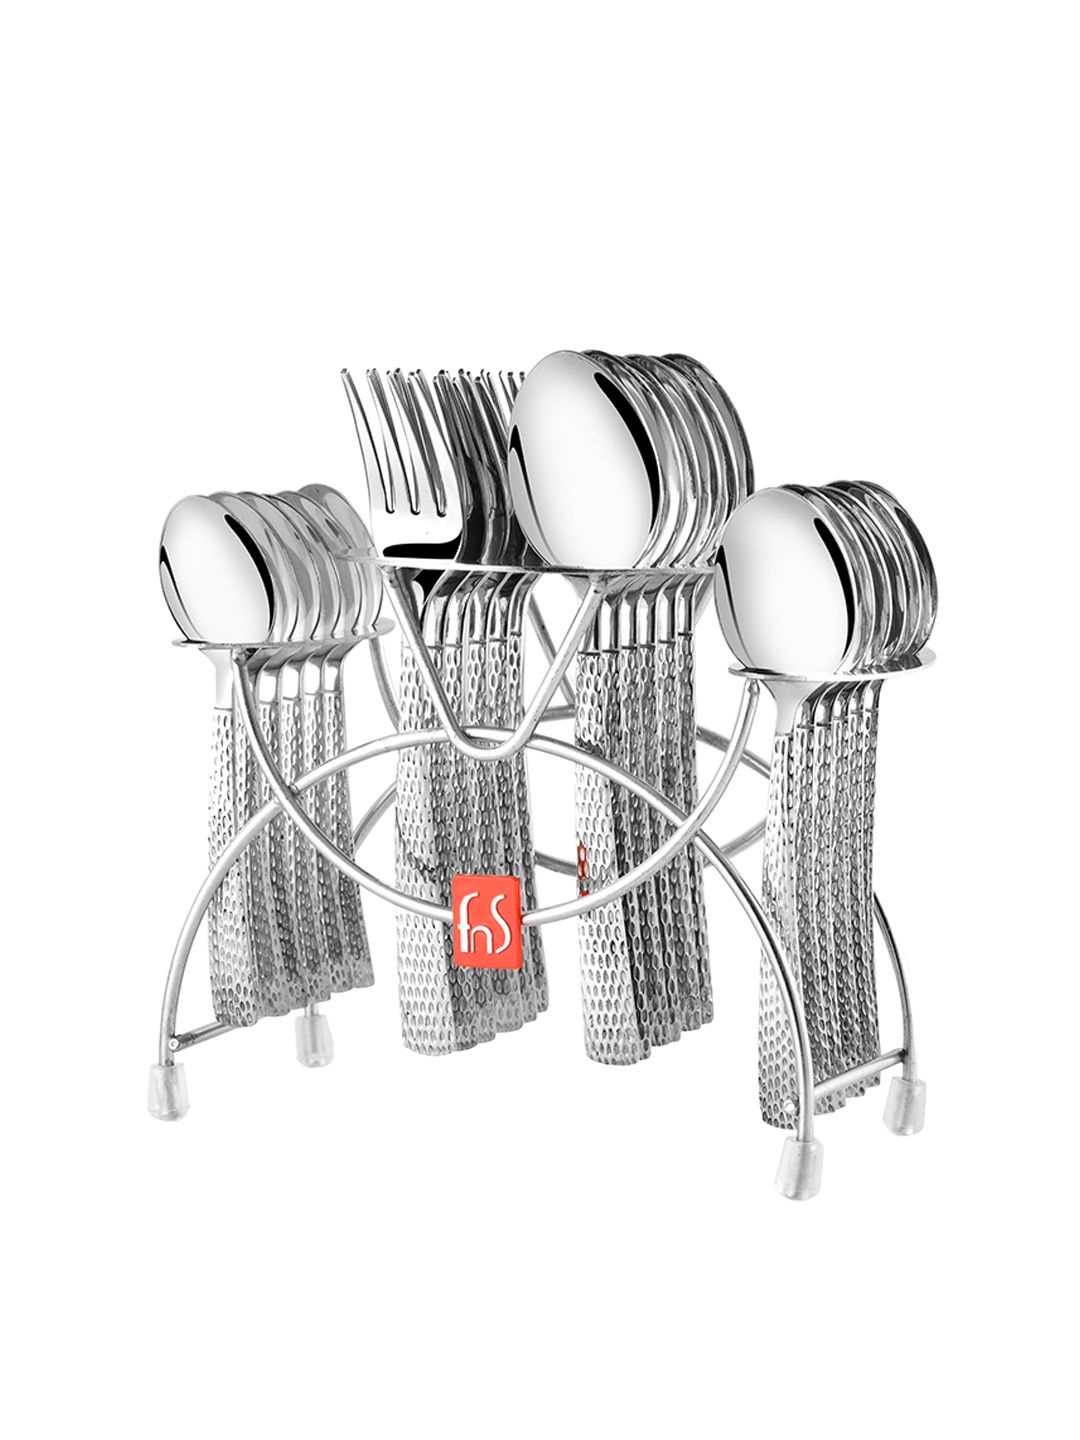 FNS Madrid 24 Pcs Hammer Finish Cutlery Set with Stand Price in India